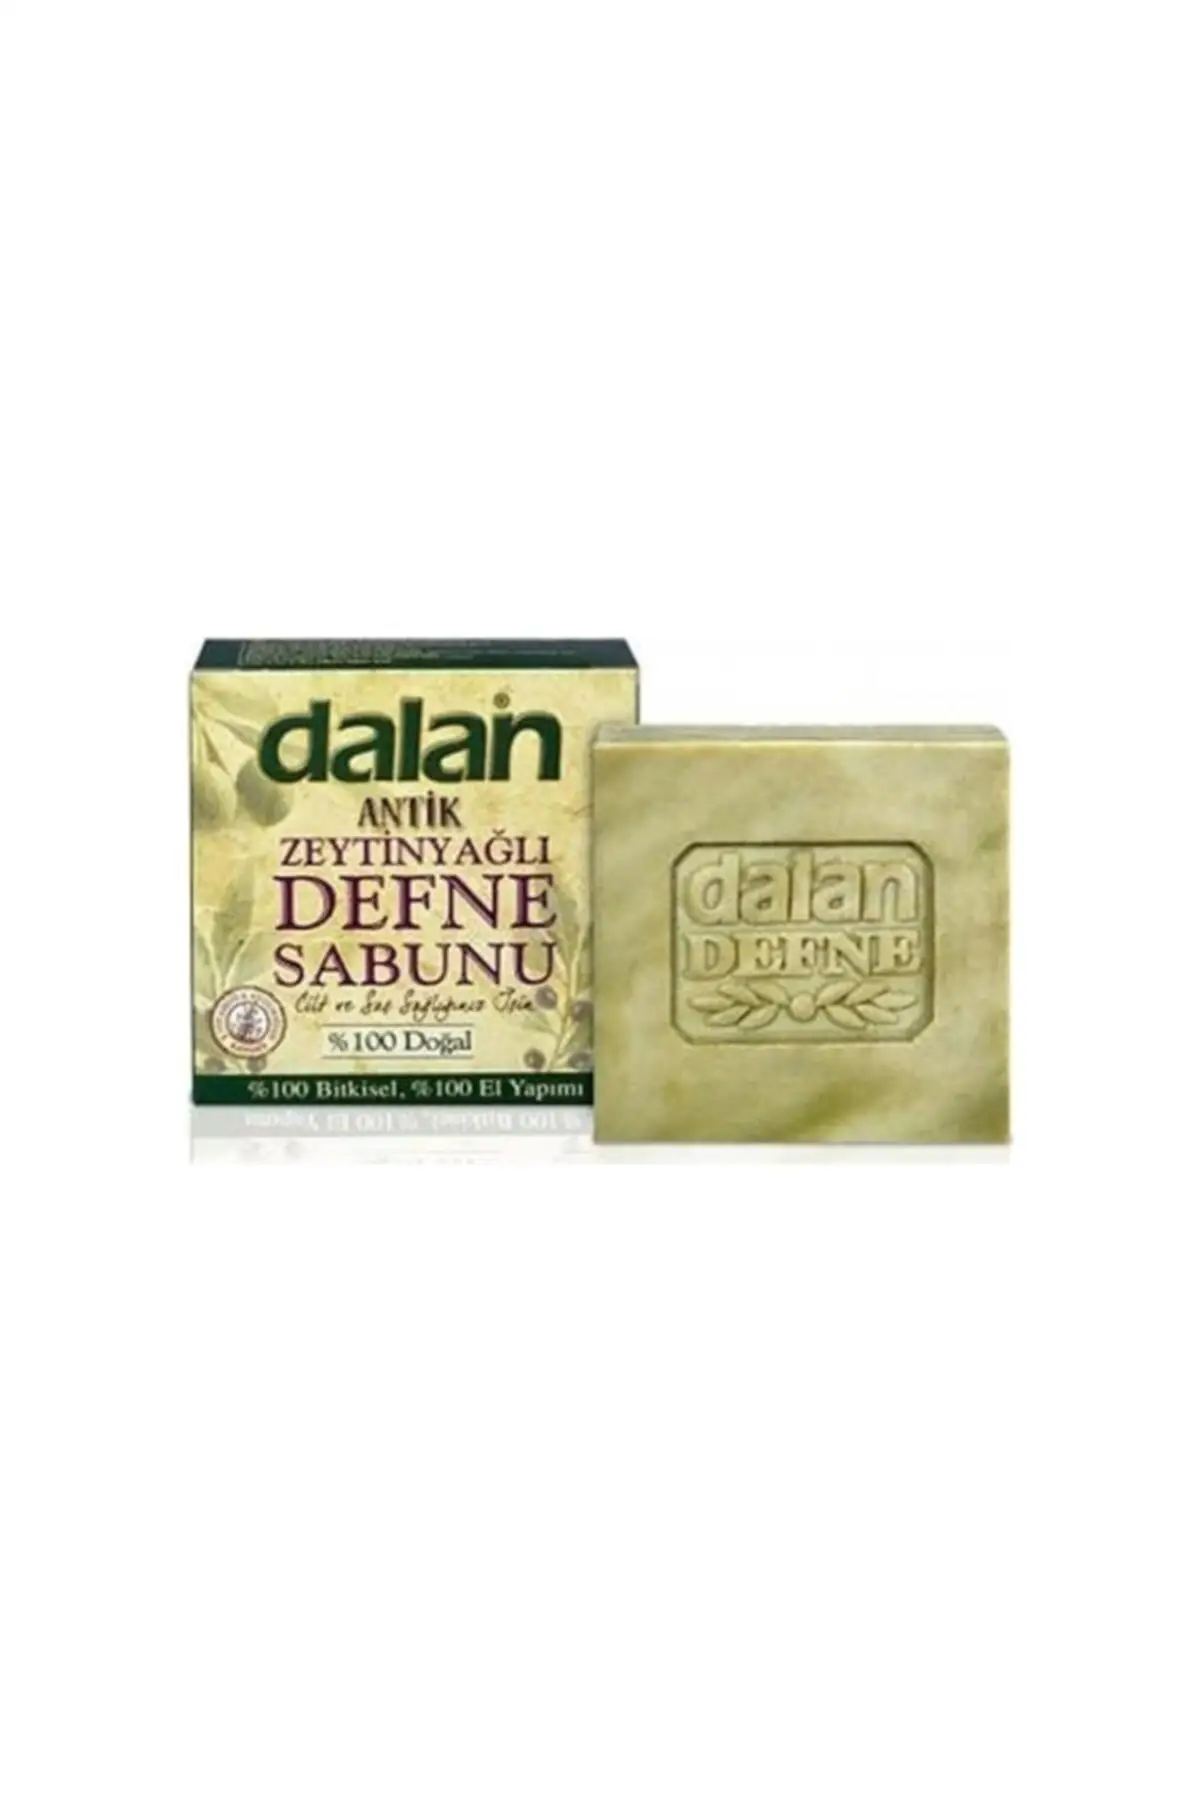 

Dalan Antique Daphne With Olive Oil Soap Natural 150 g %100 Herbal Skin Cleansing Hair Cleansing Beauty Skin Care Handmade